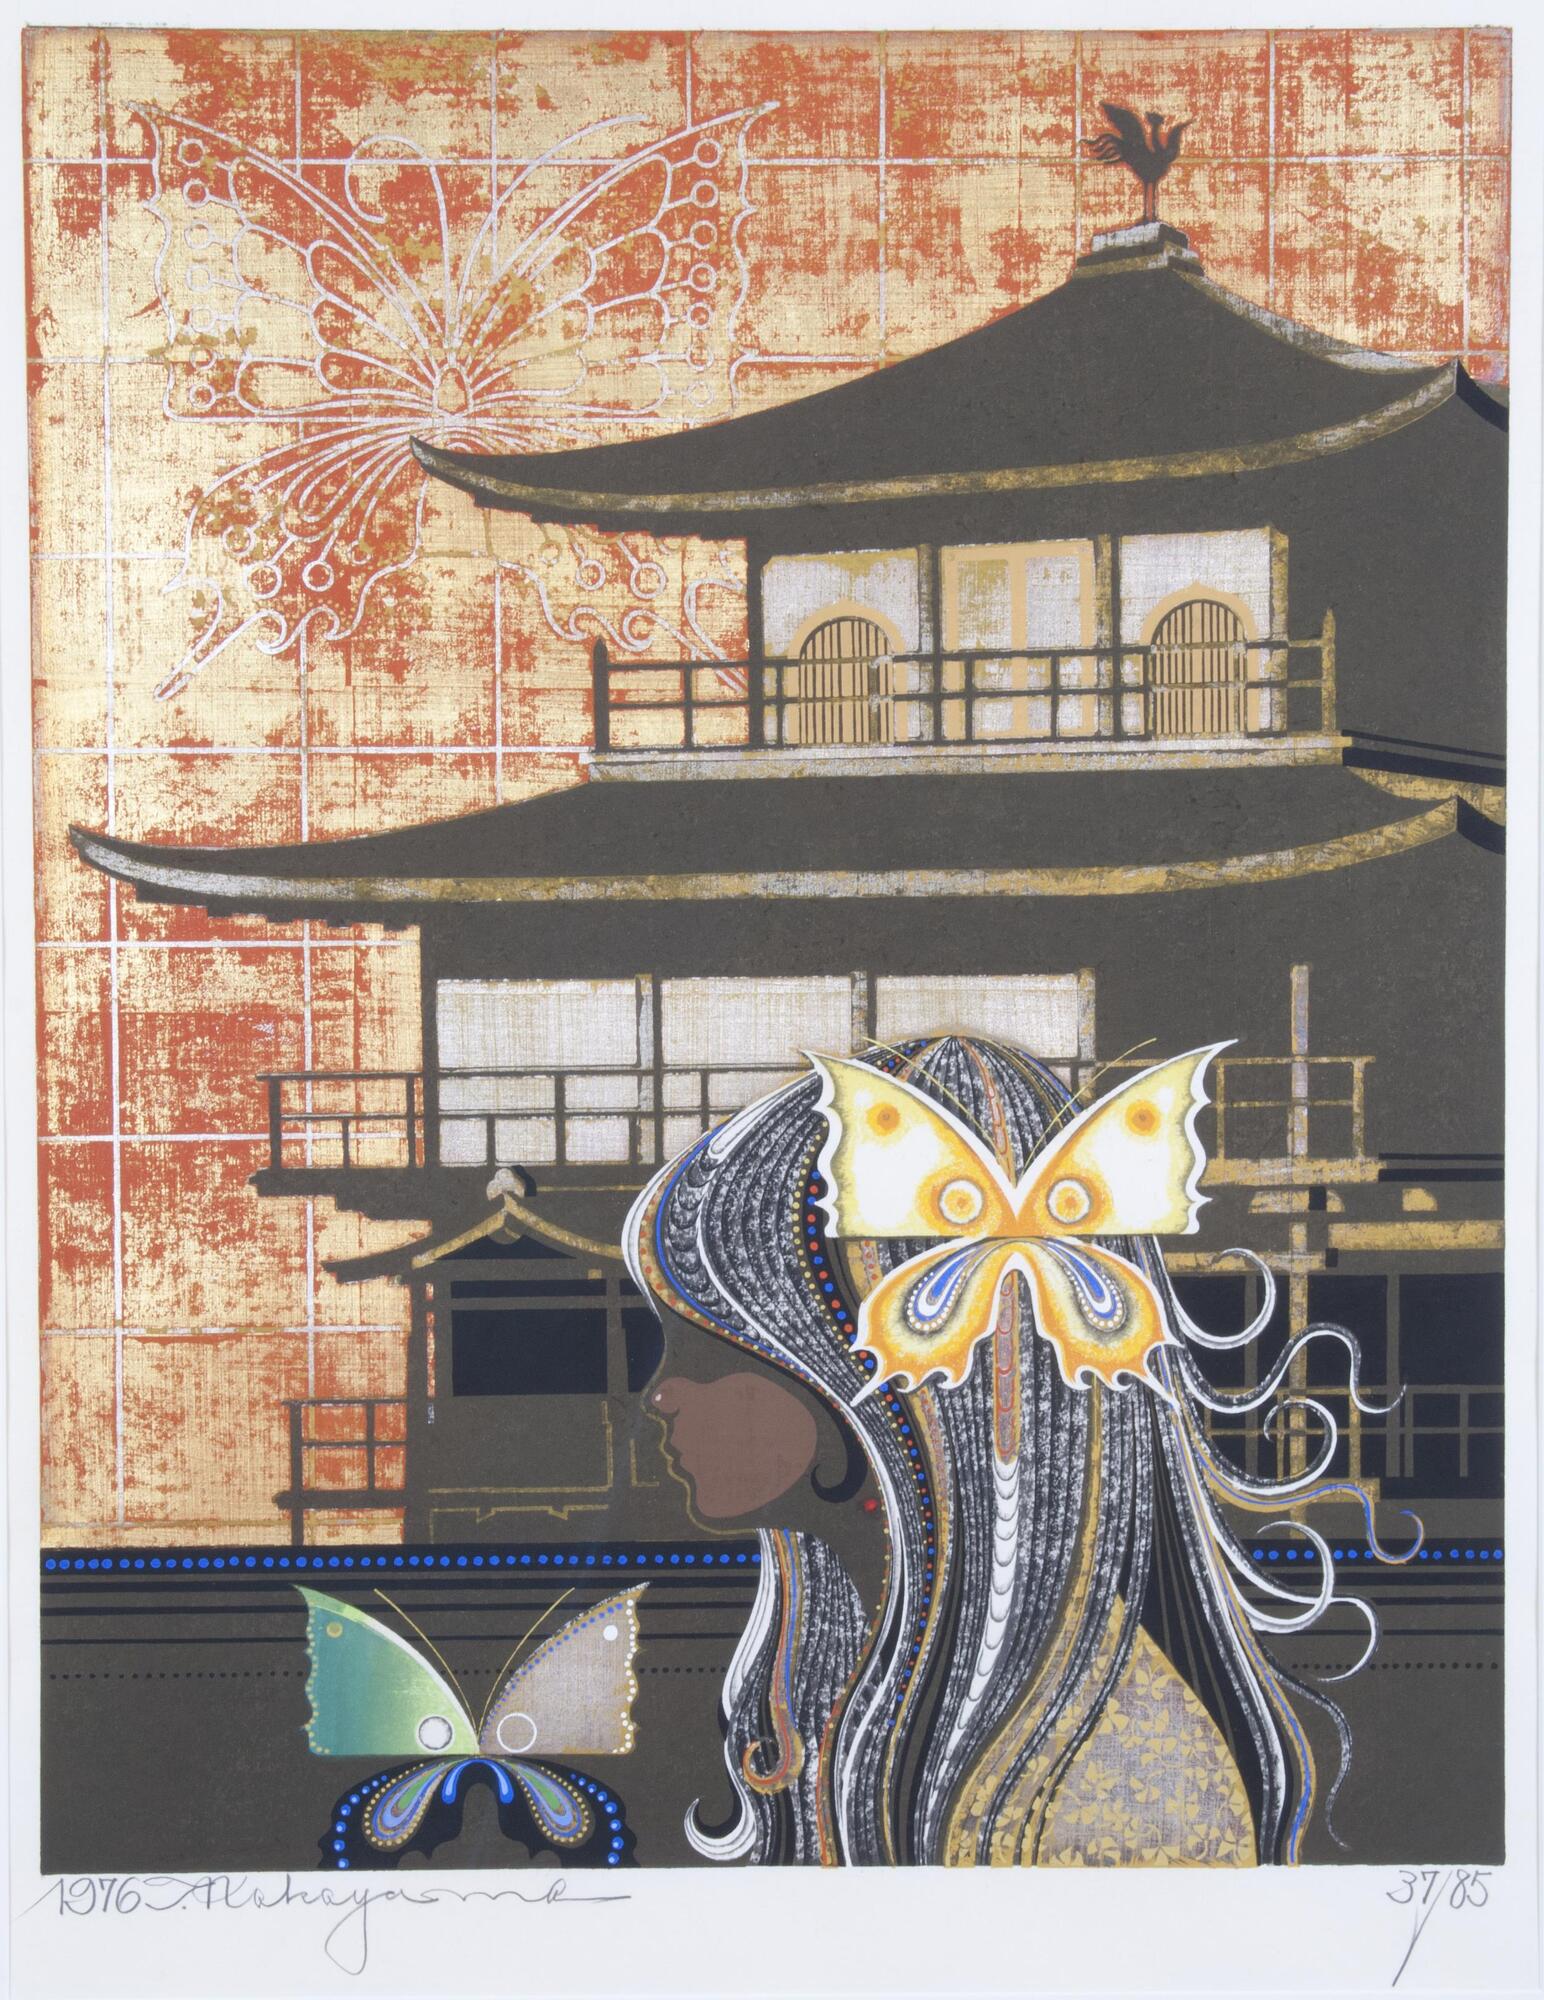 A girl with her head and body in profile, her black hair is highlighted with white, brown, and blue strands, and red and blue dots. There is a white, yellow, and blue butterfly in her hair, and another green, blue, gray and black butterfly in front of her. Behind her is the golden pavilion. The background is a faded red-orange and there is an outline of a butterfly.